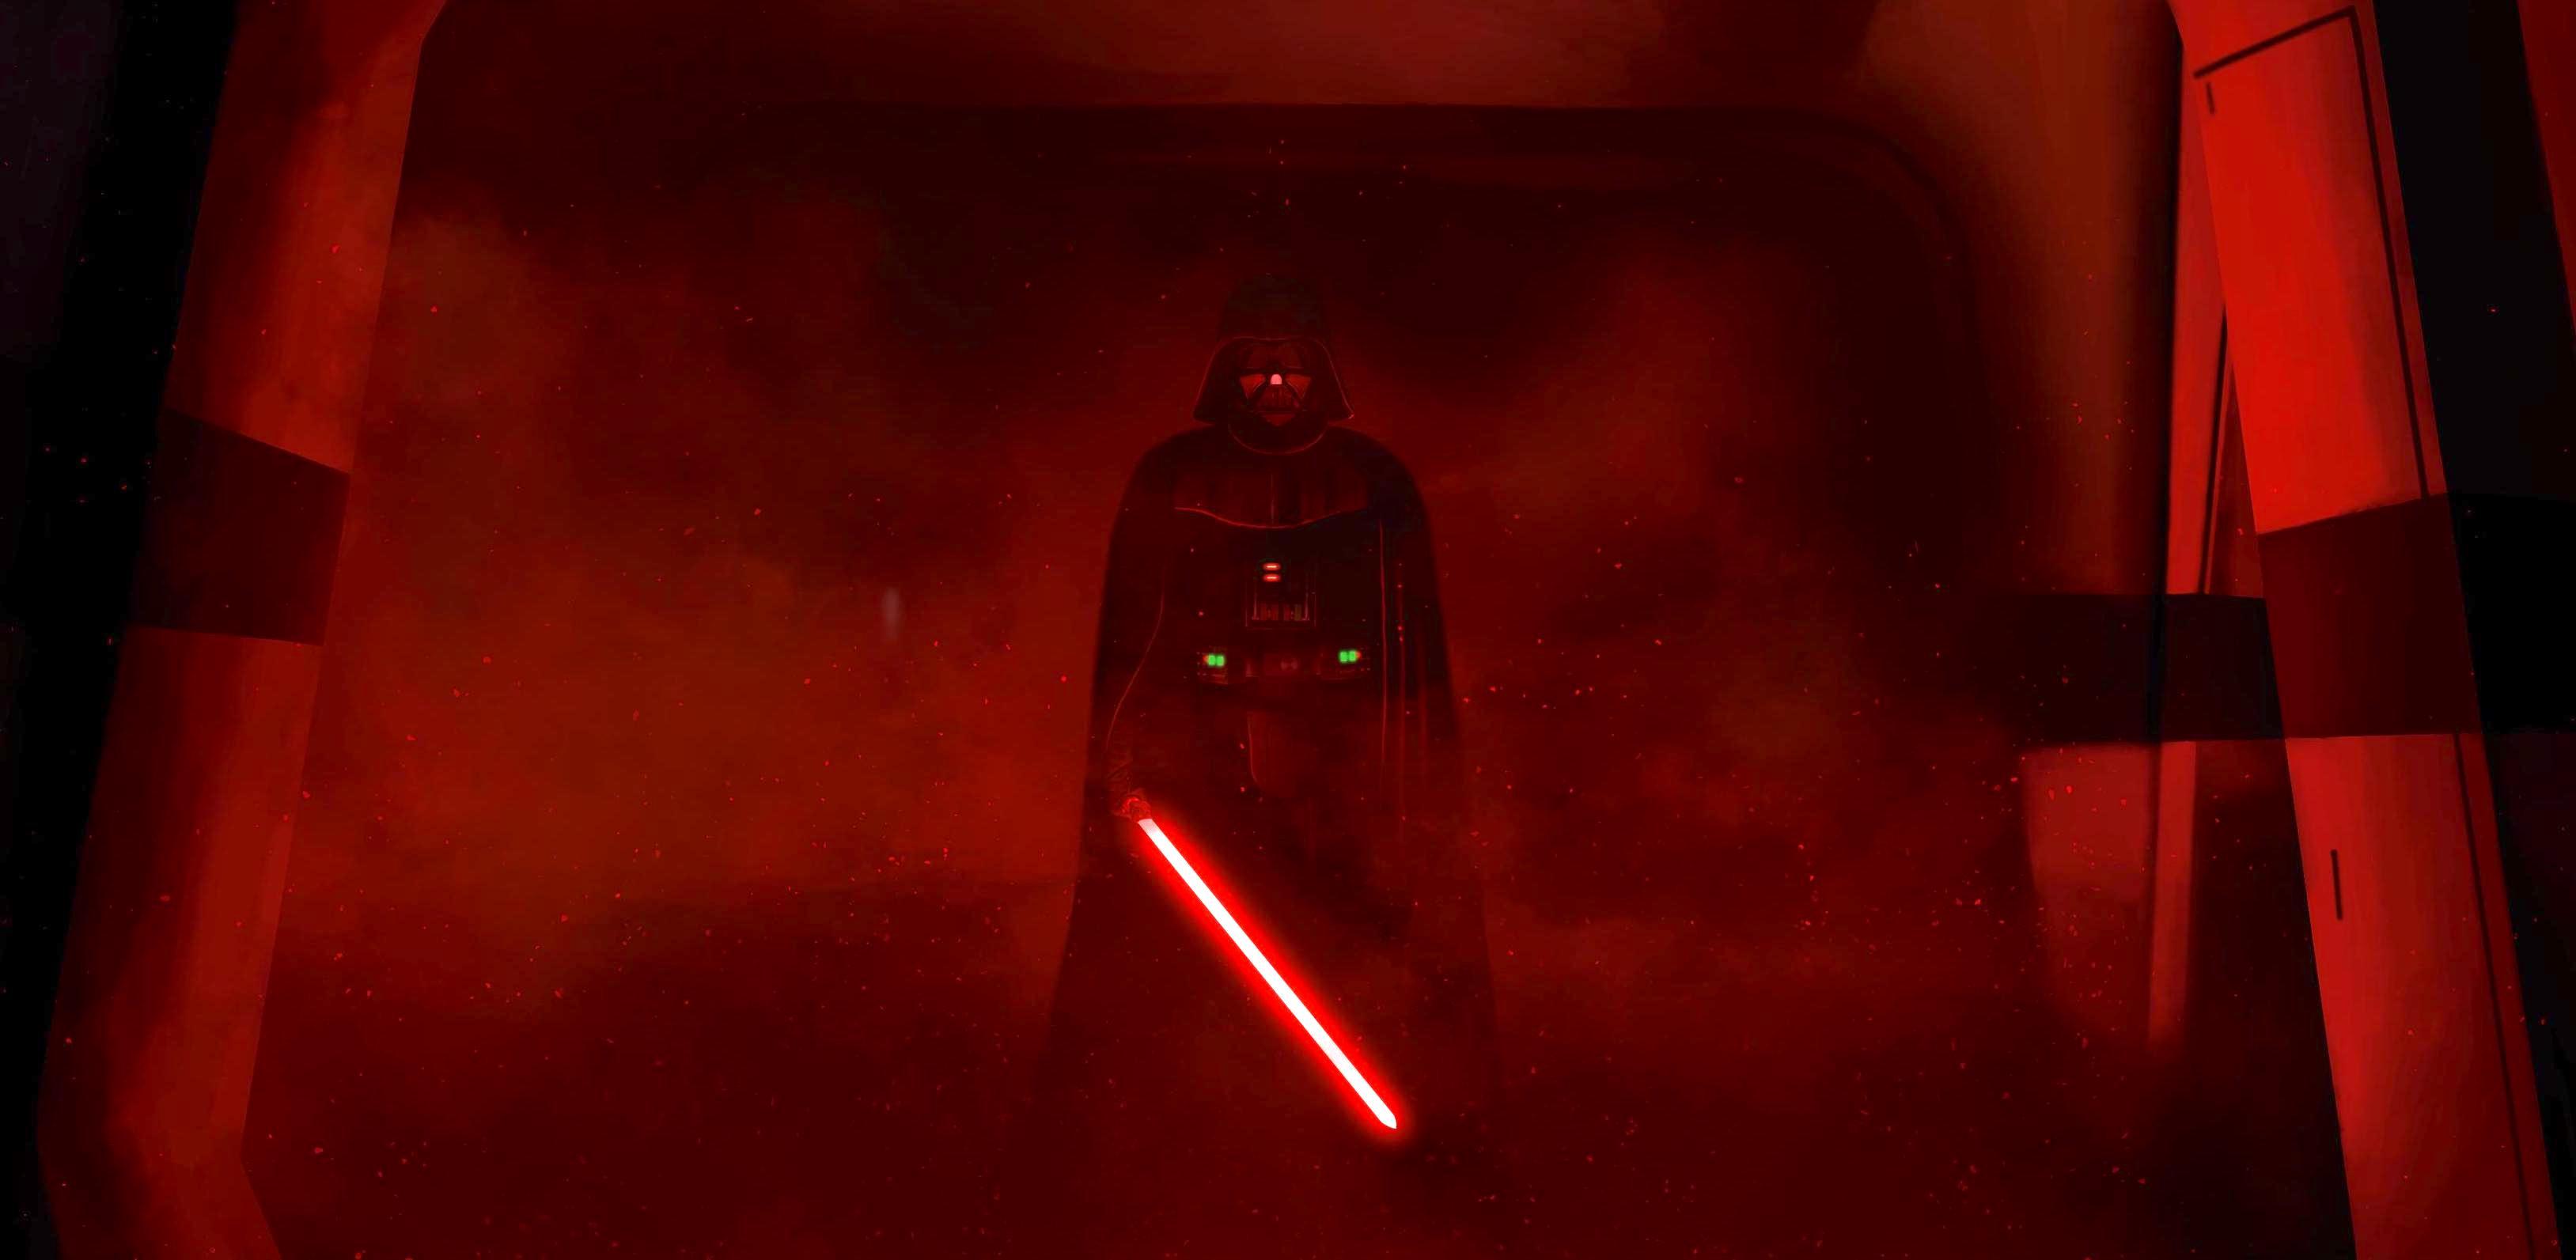 Darth Vader in "Rogue One".